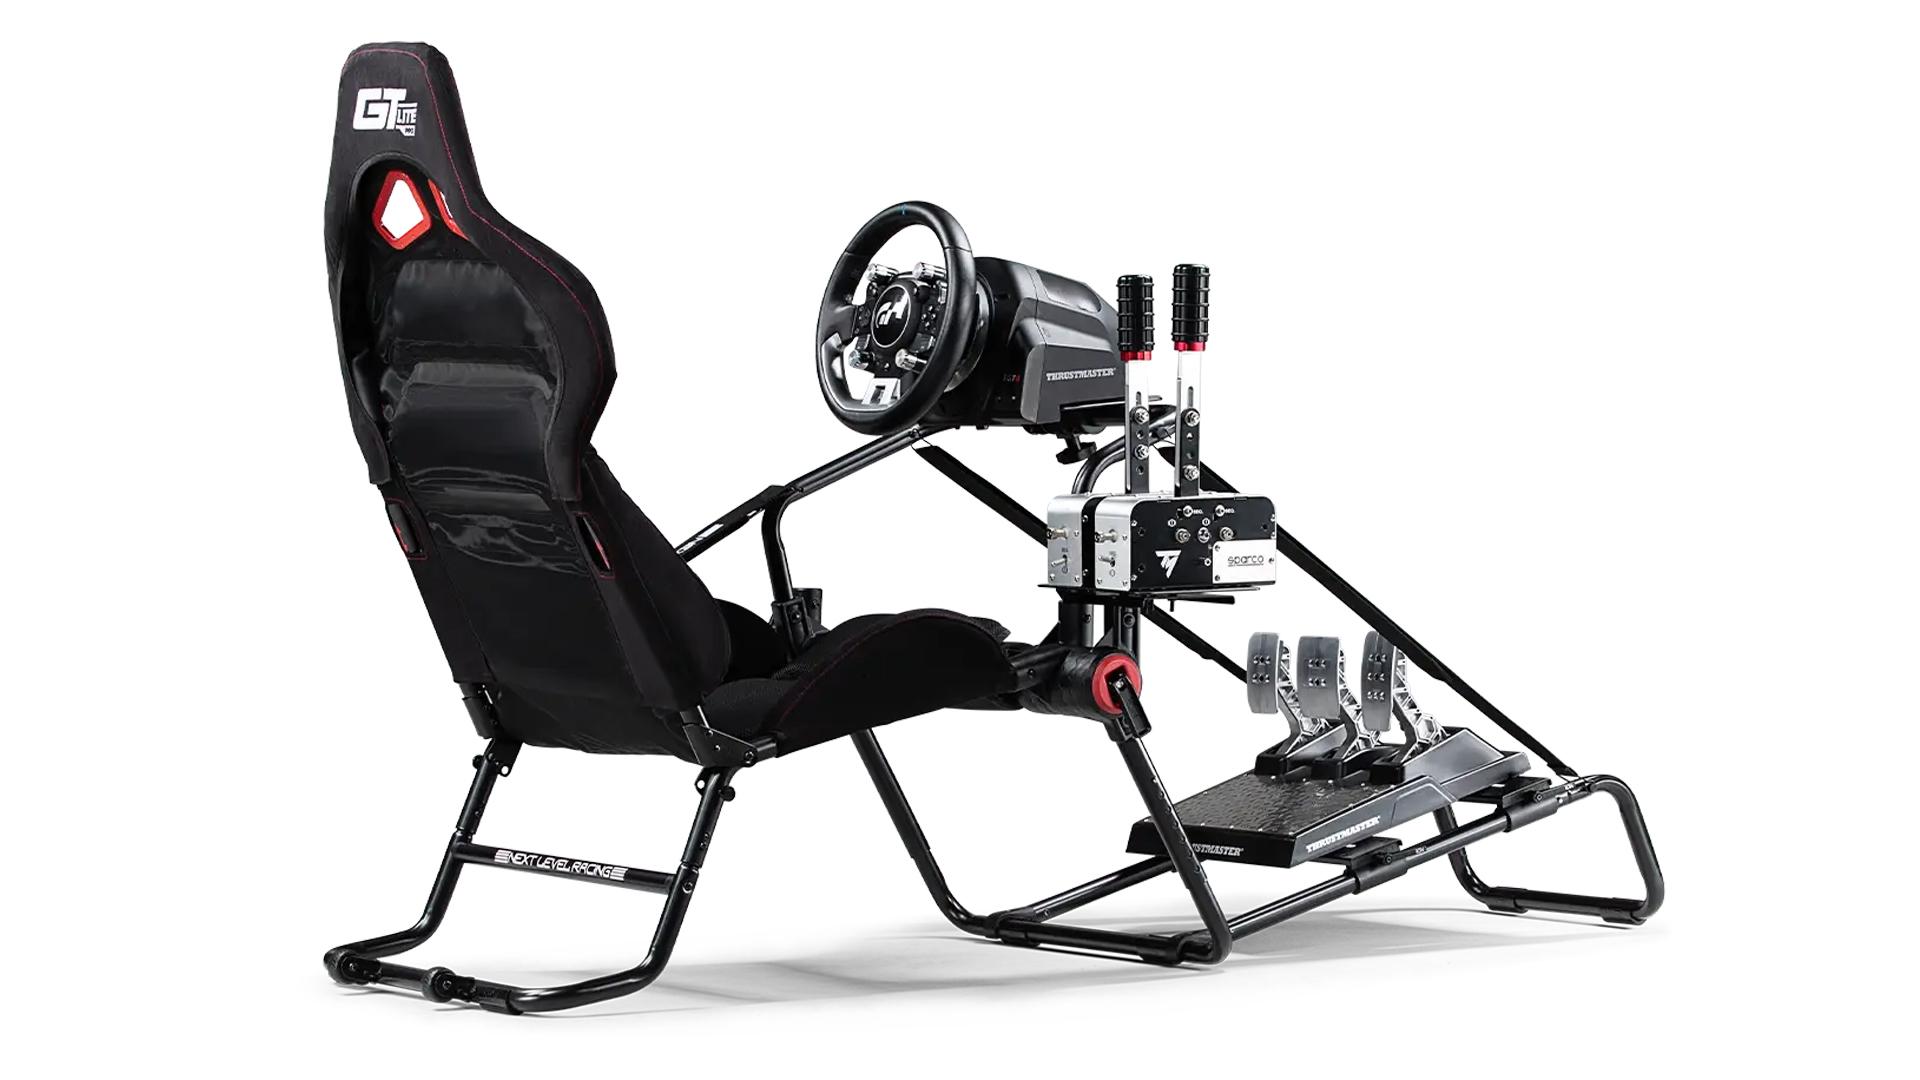 Next Level Racing's GTLite Pro is an upgraded foldable sim racing